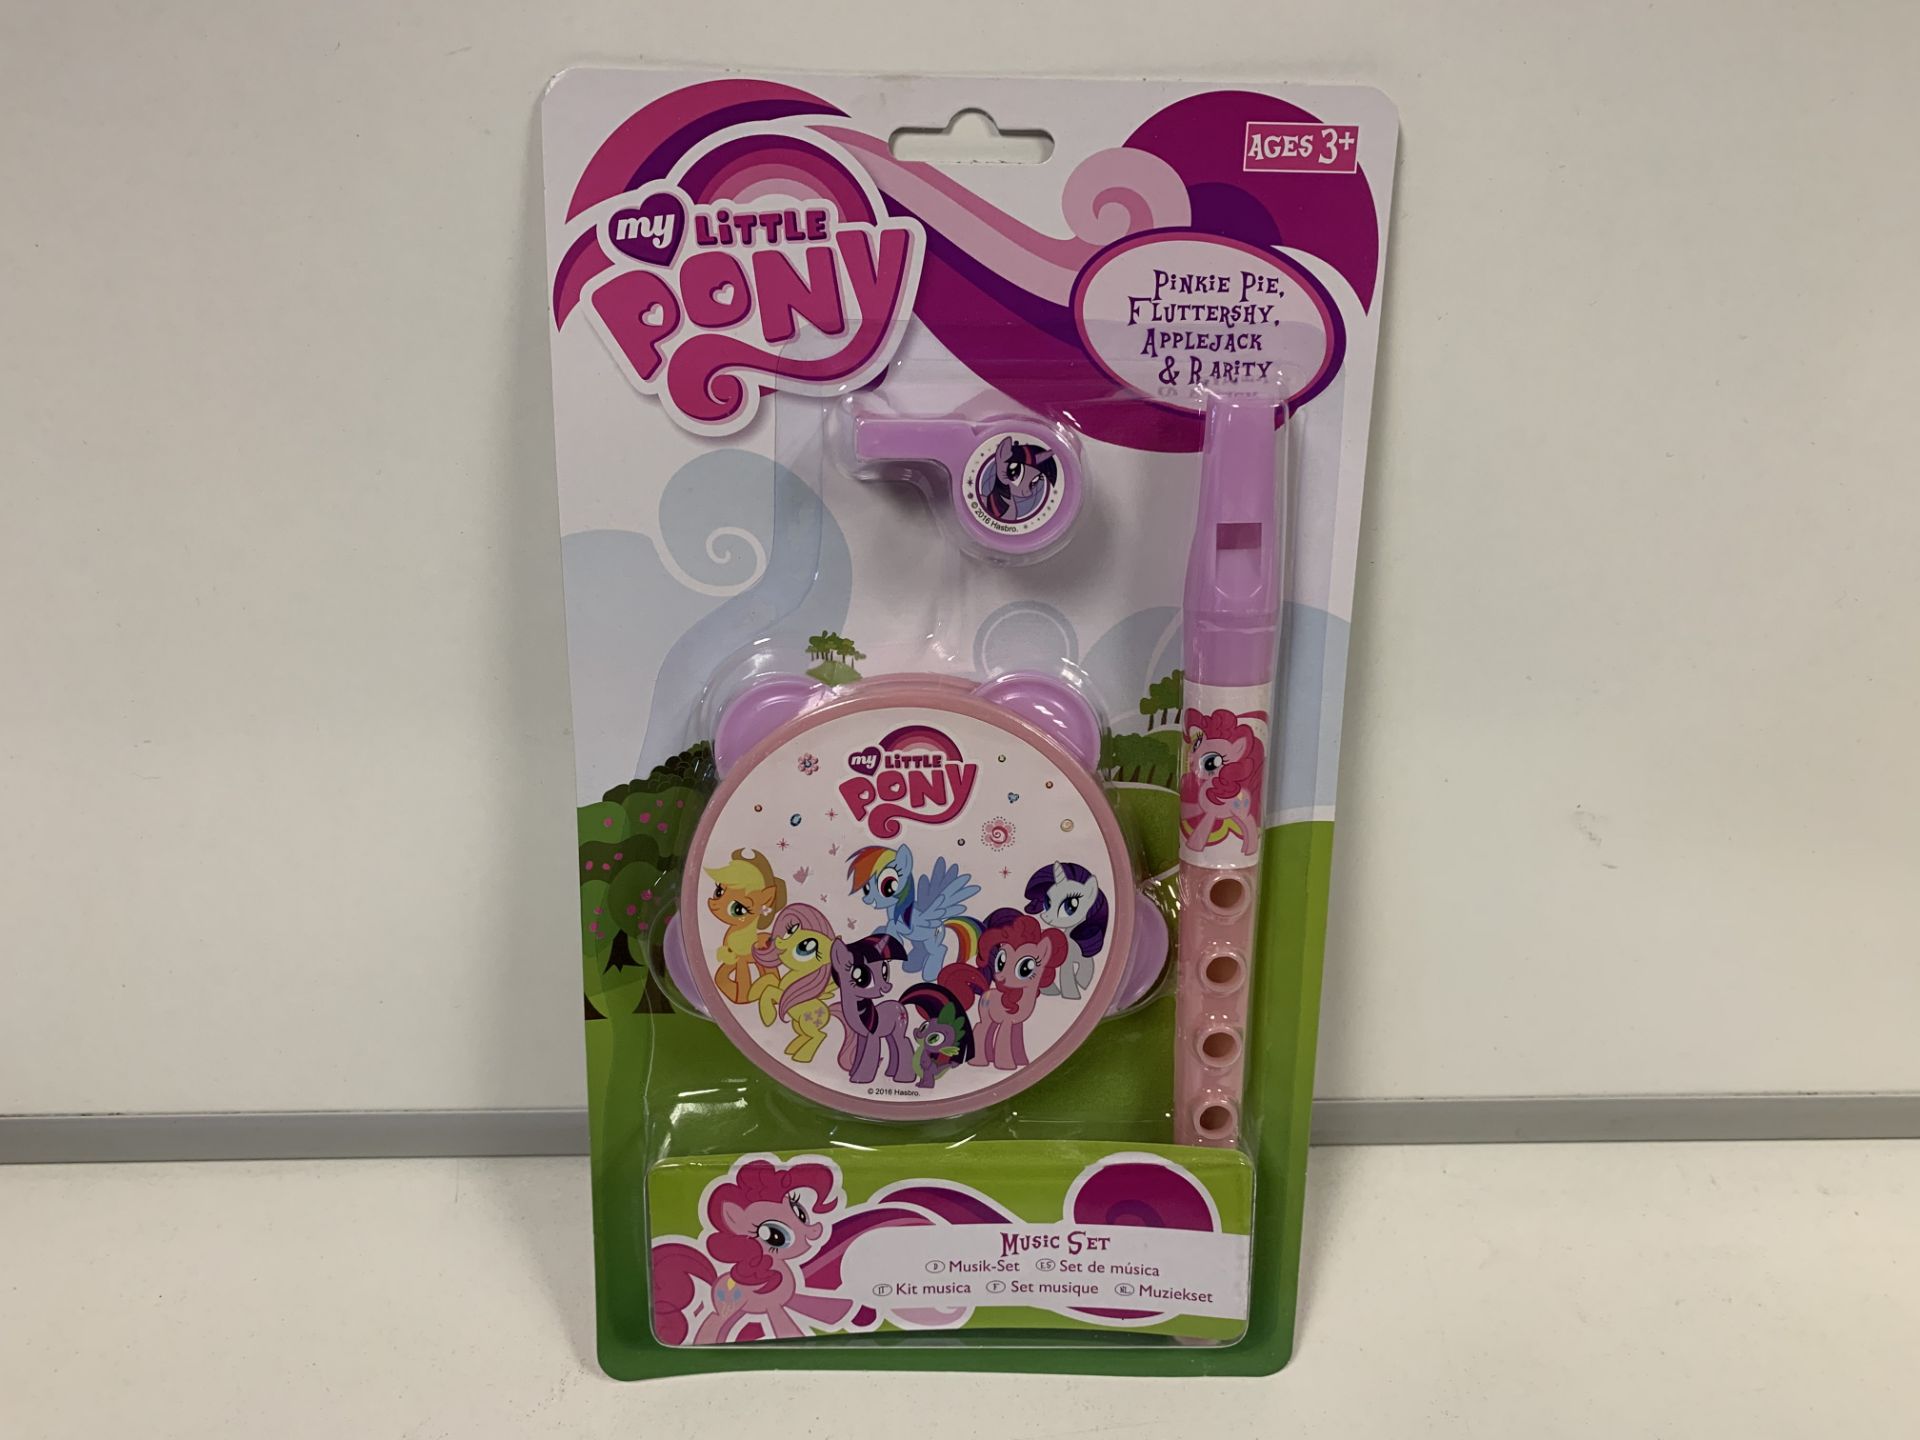 48 x NEW MY LITTLE PONY 3 PIECE MUSIC SETS. RRP £9.99 EACH